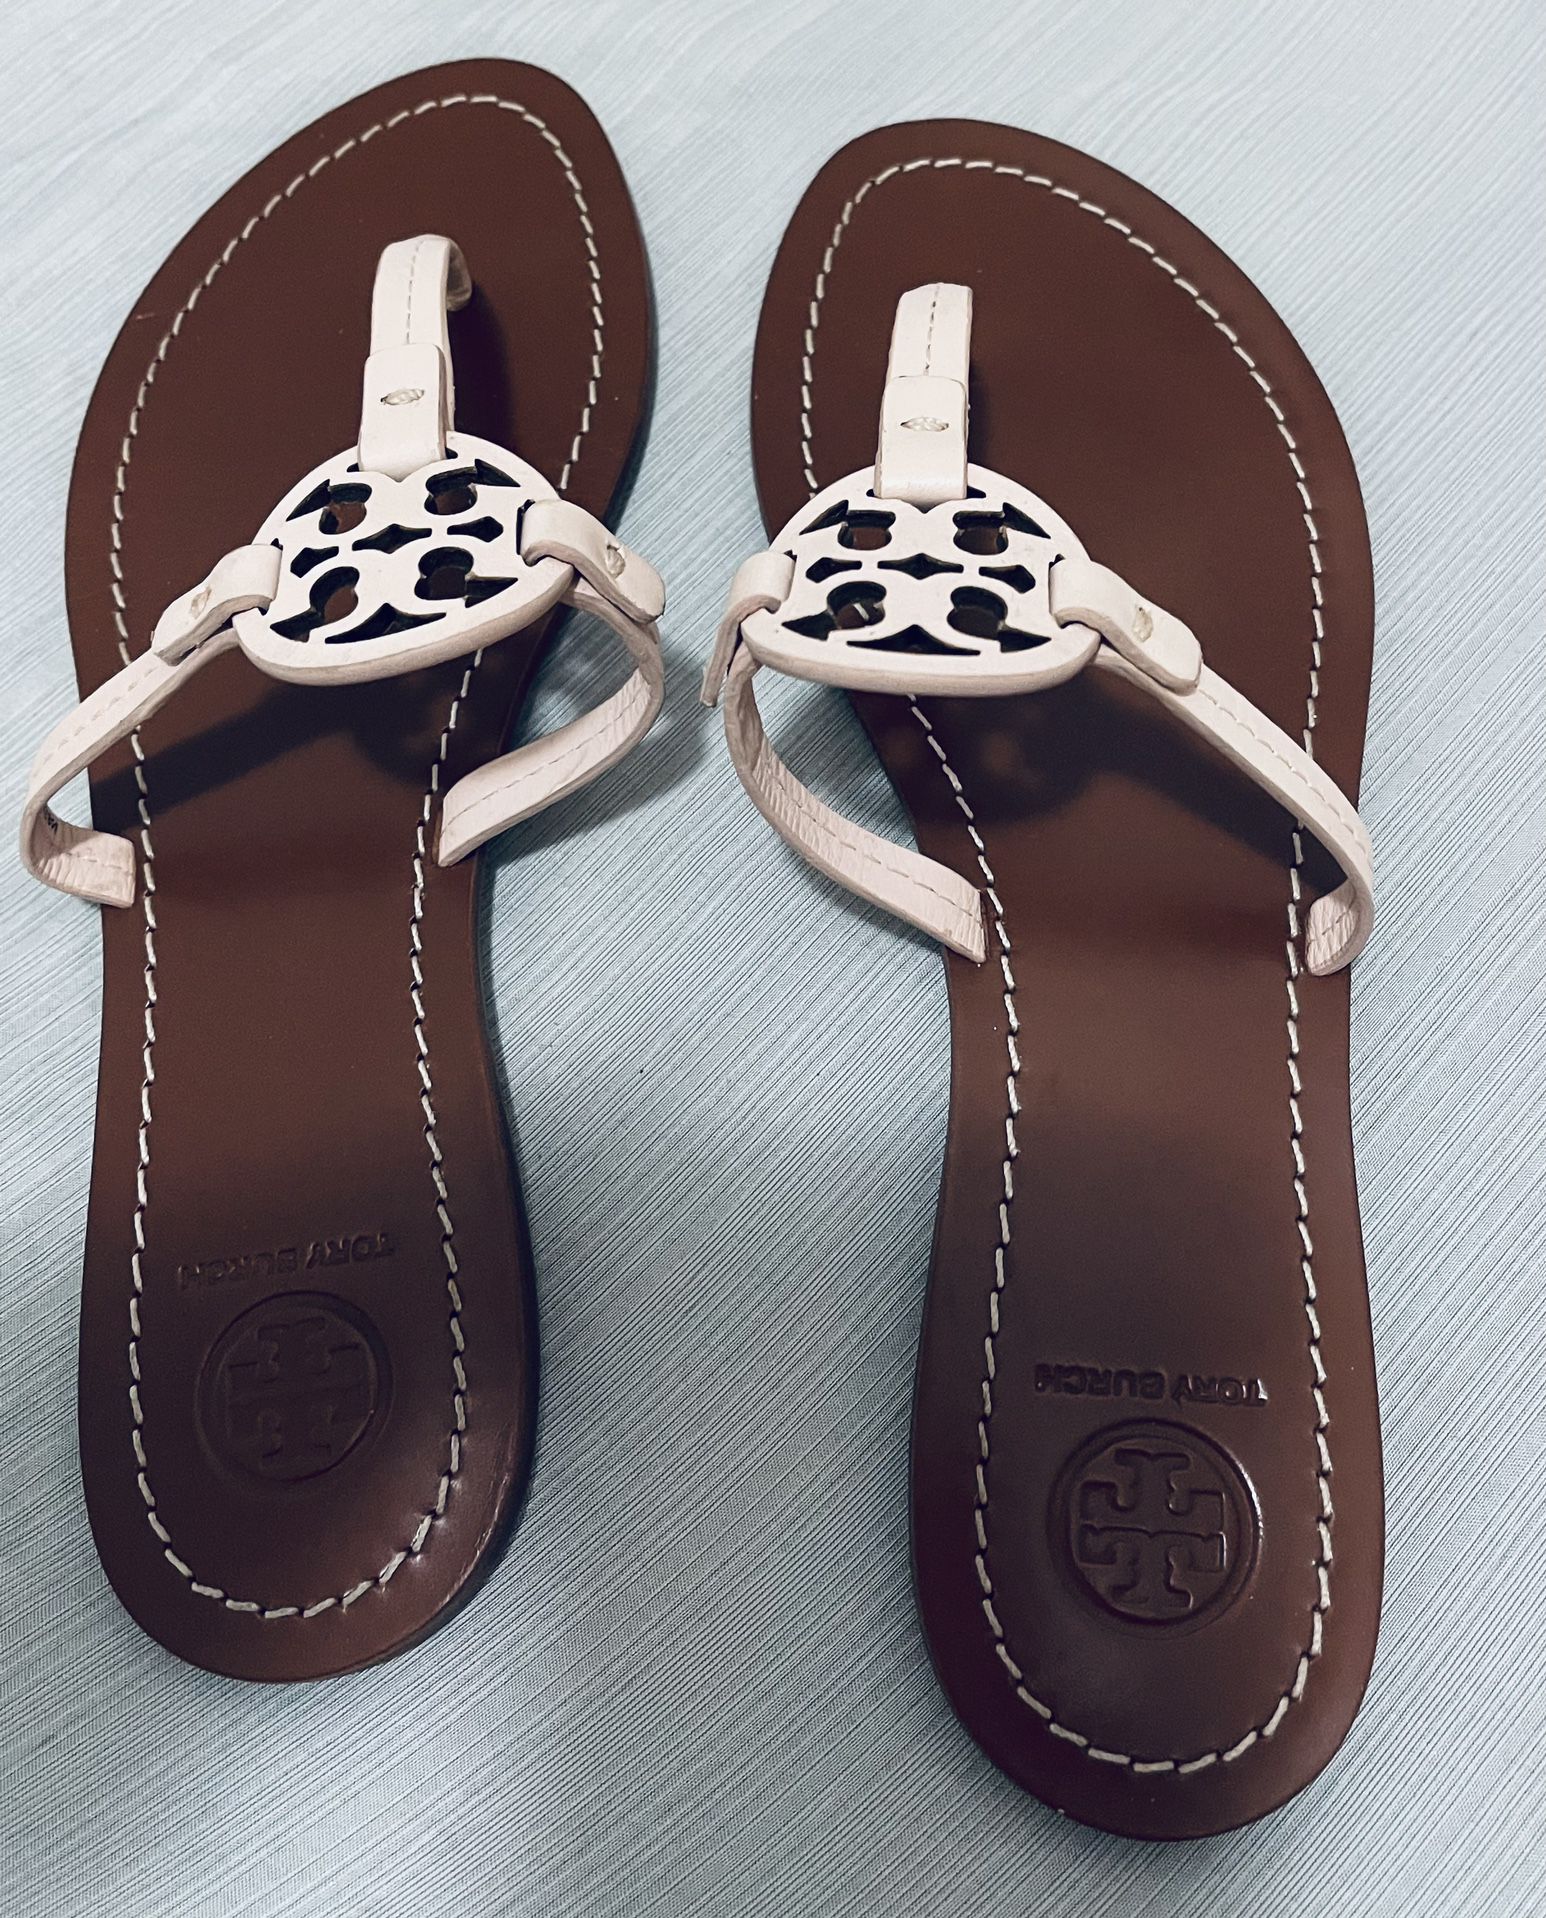 Tory Burch Size 7.5 Excellent Conditions Original Price $225